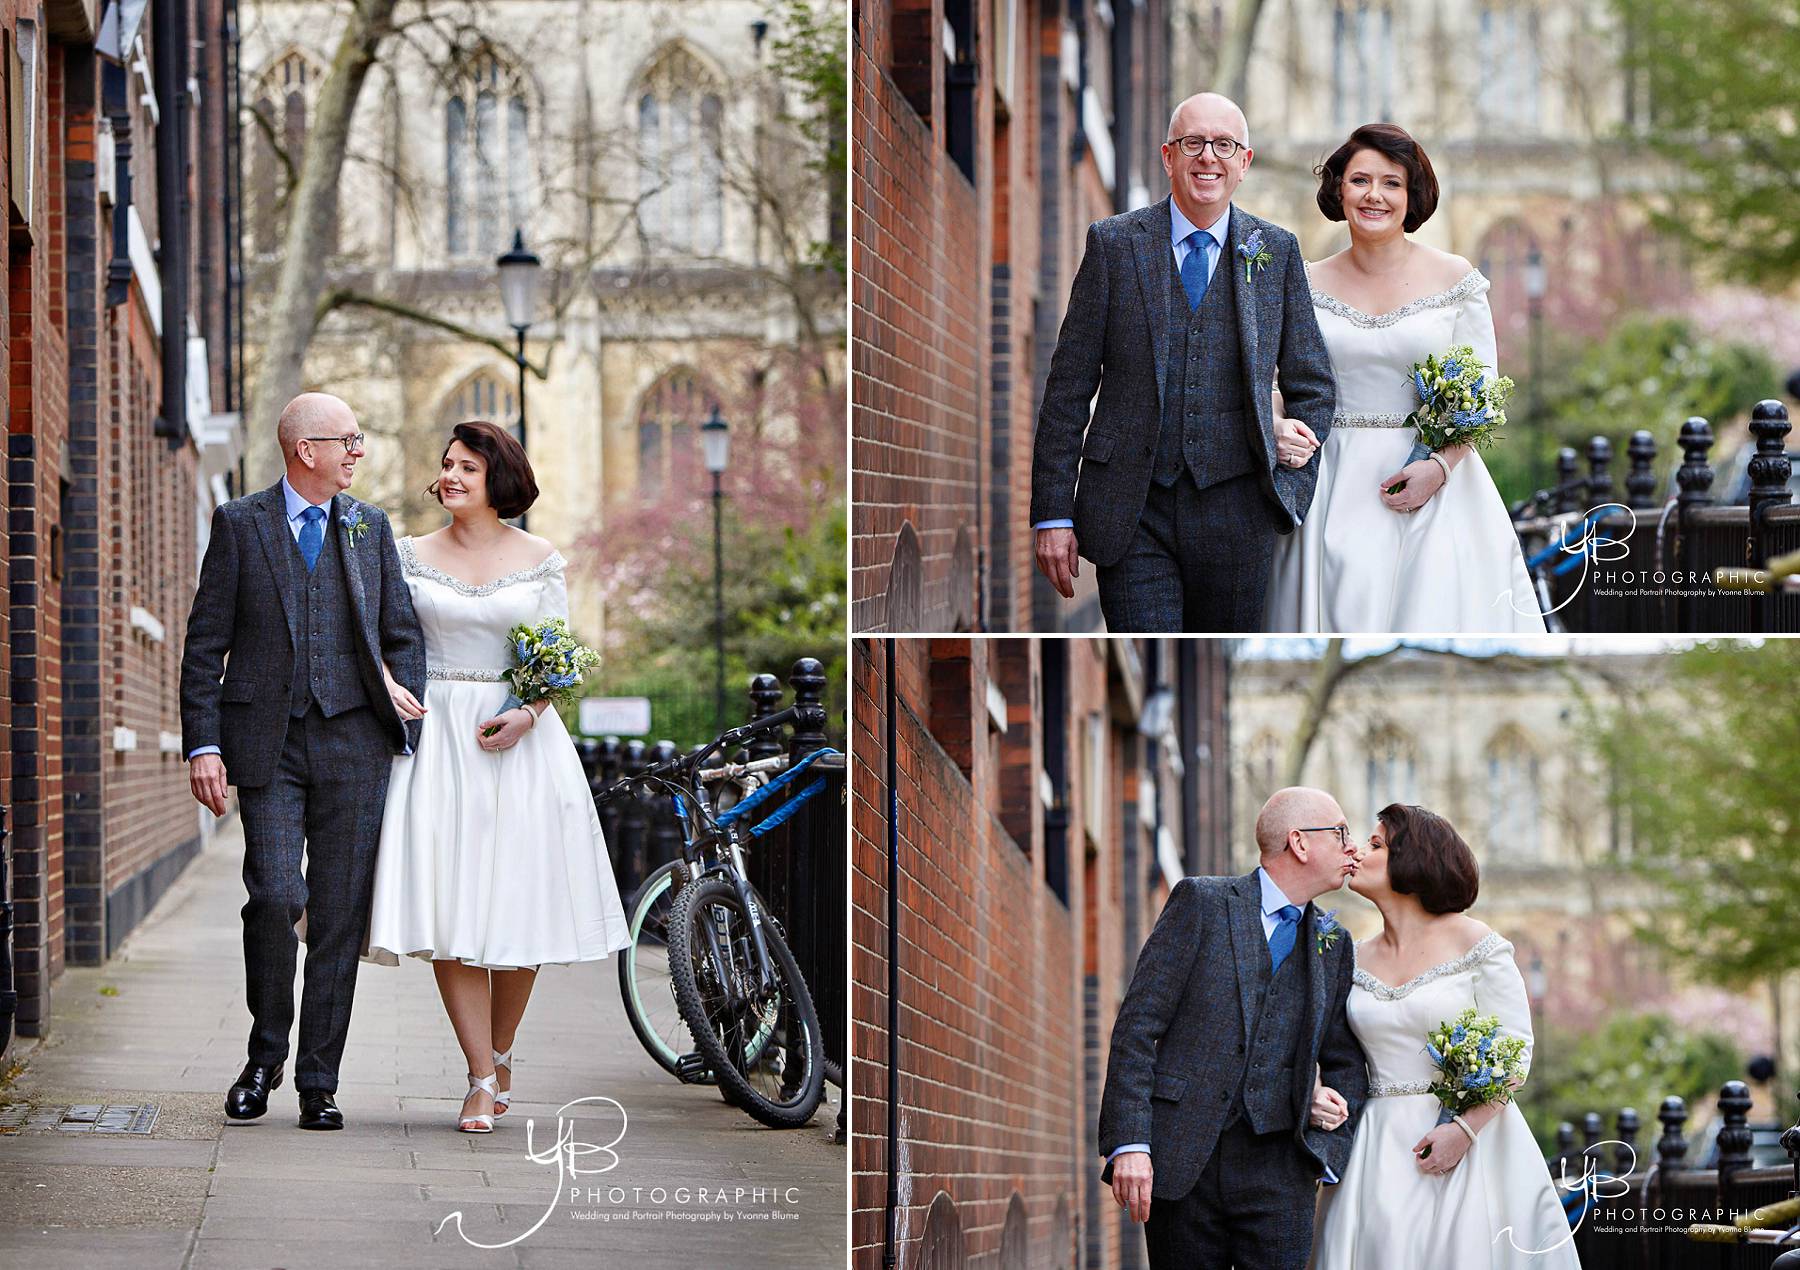 Spring wedding portraits in Chelsea by YBPHOTOGRAPHIC